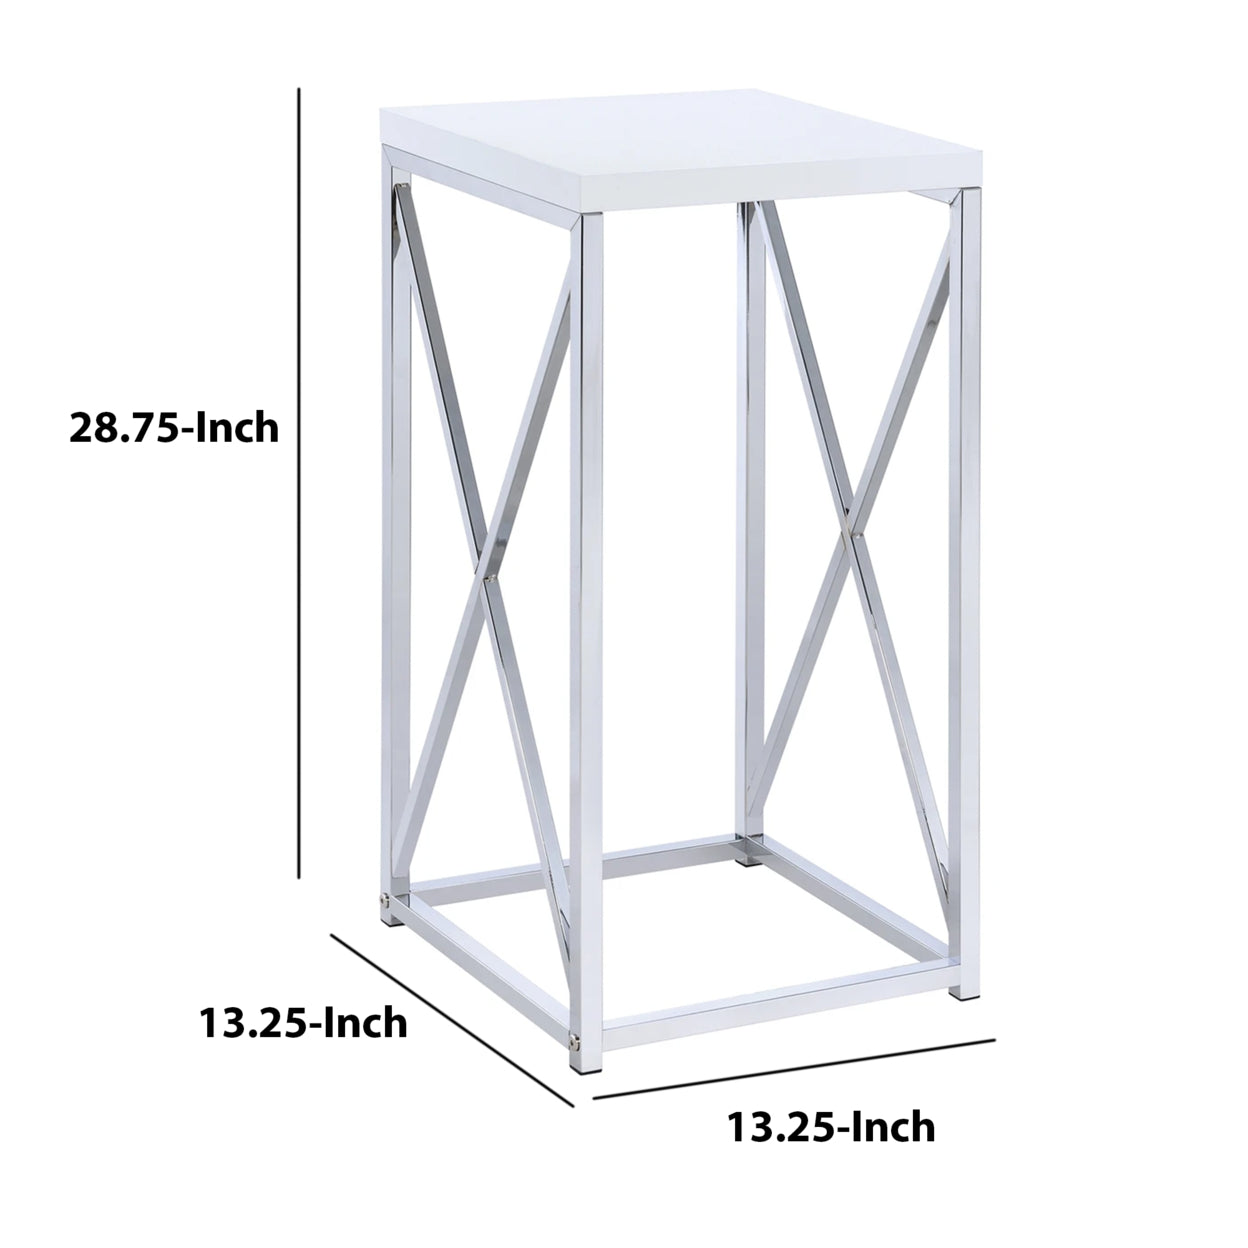 Accent Table with X-cross Glossy White and Chrome